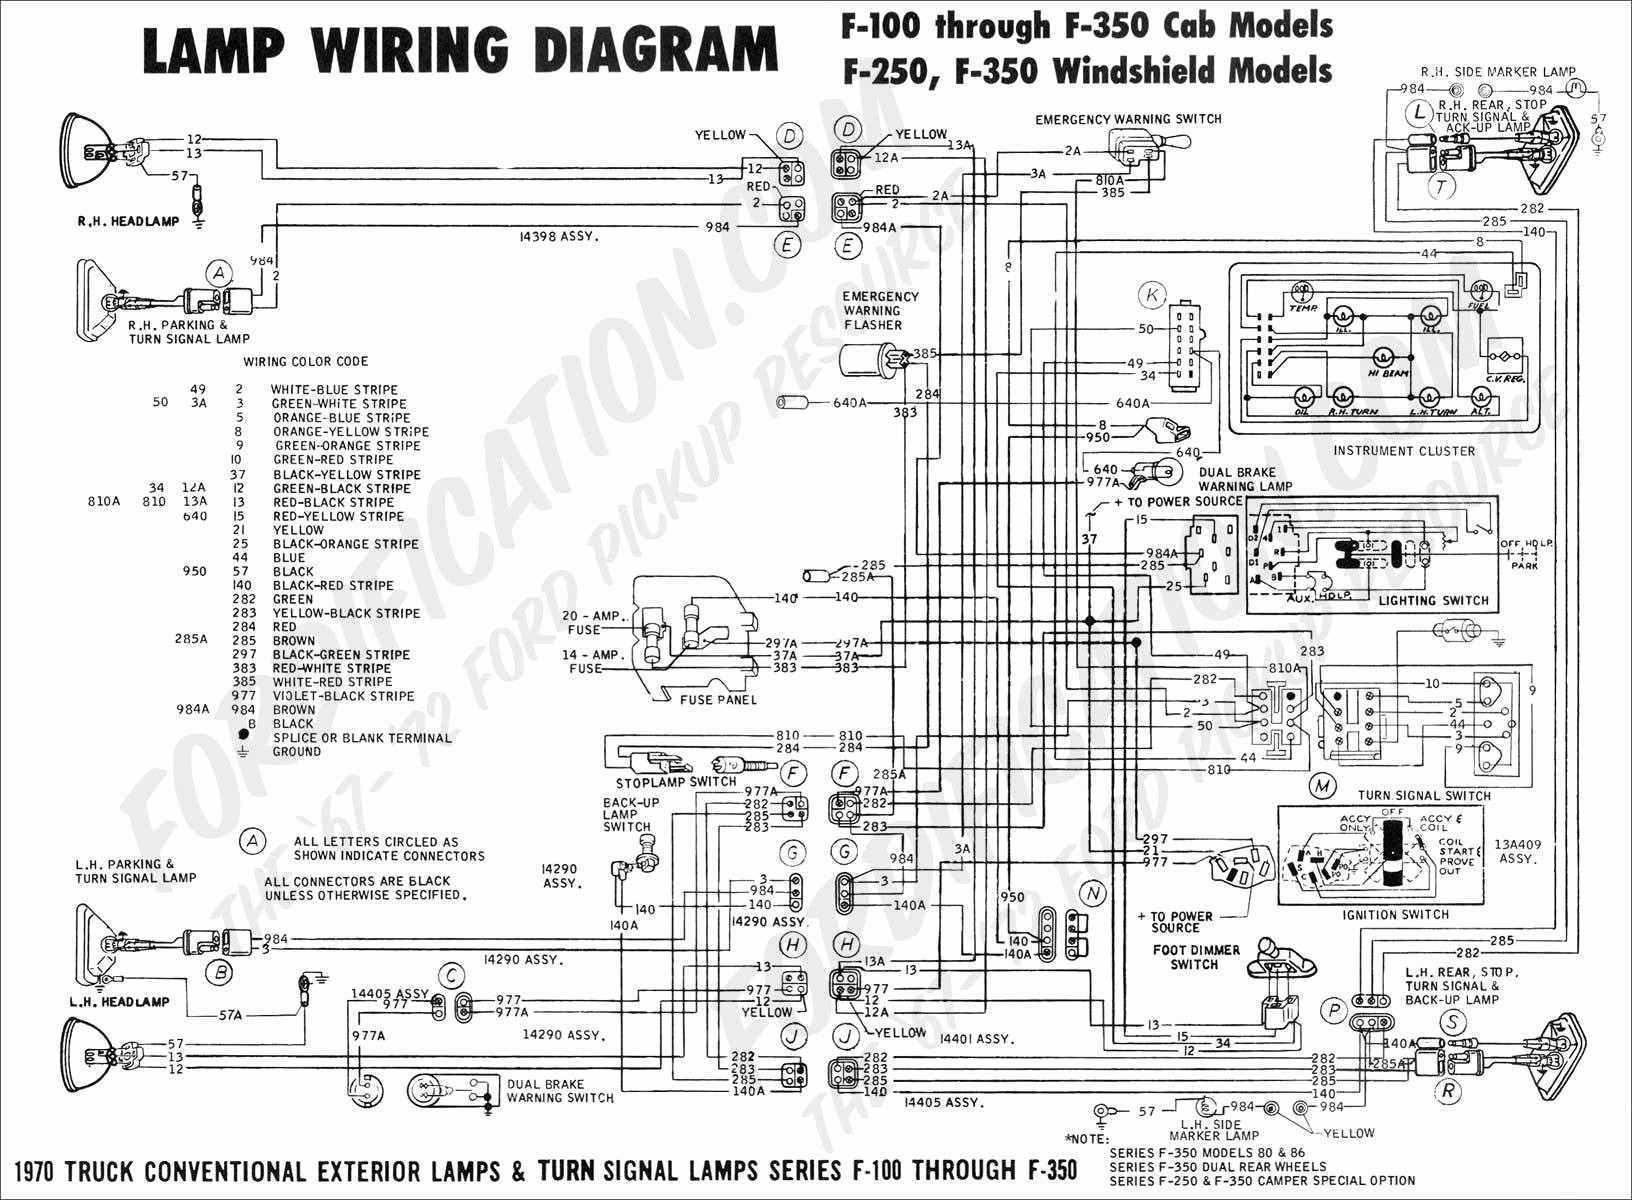 Atv Wire Diagram for Winch Motor Gx 9014] Chinese atv Cdi Wiring Diagram Further Bmw X5 Of Atv Wire Diagram for Winch Motor